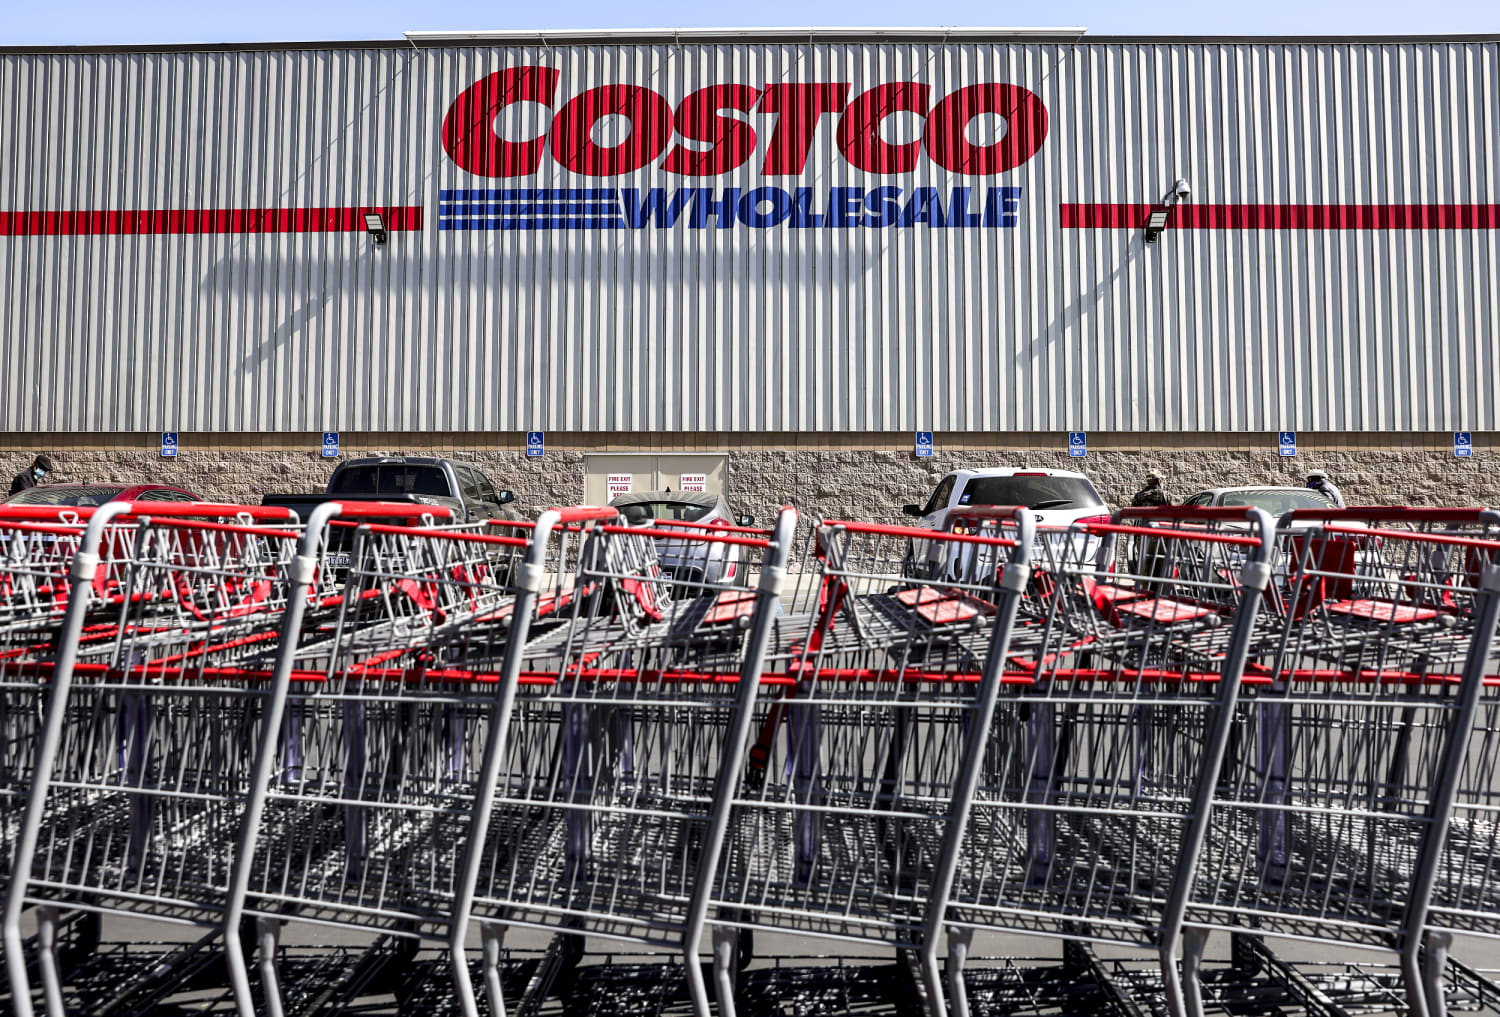 Freon leak at New Jersey Costco leads to 20 sick employees, triggers evacuation